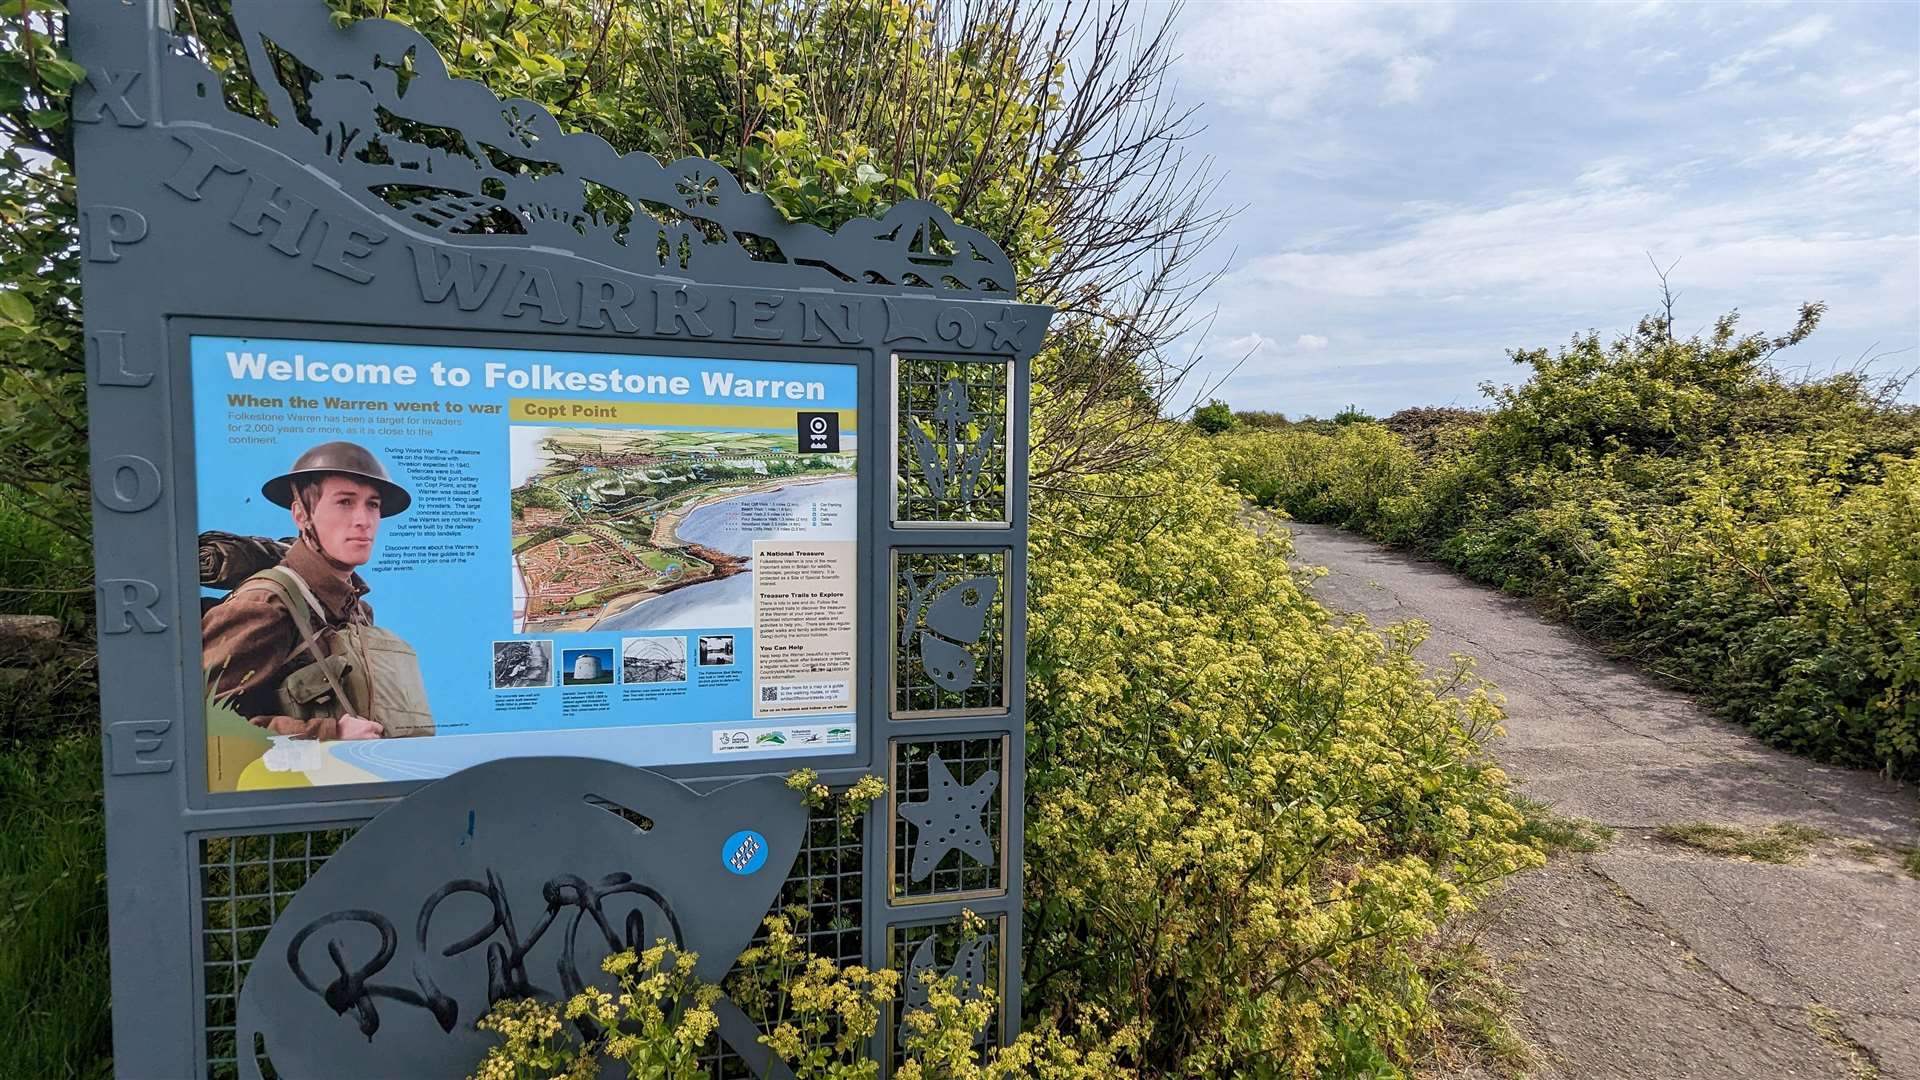 The coast path passes by the Warren outside Folkestone